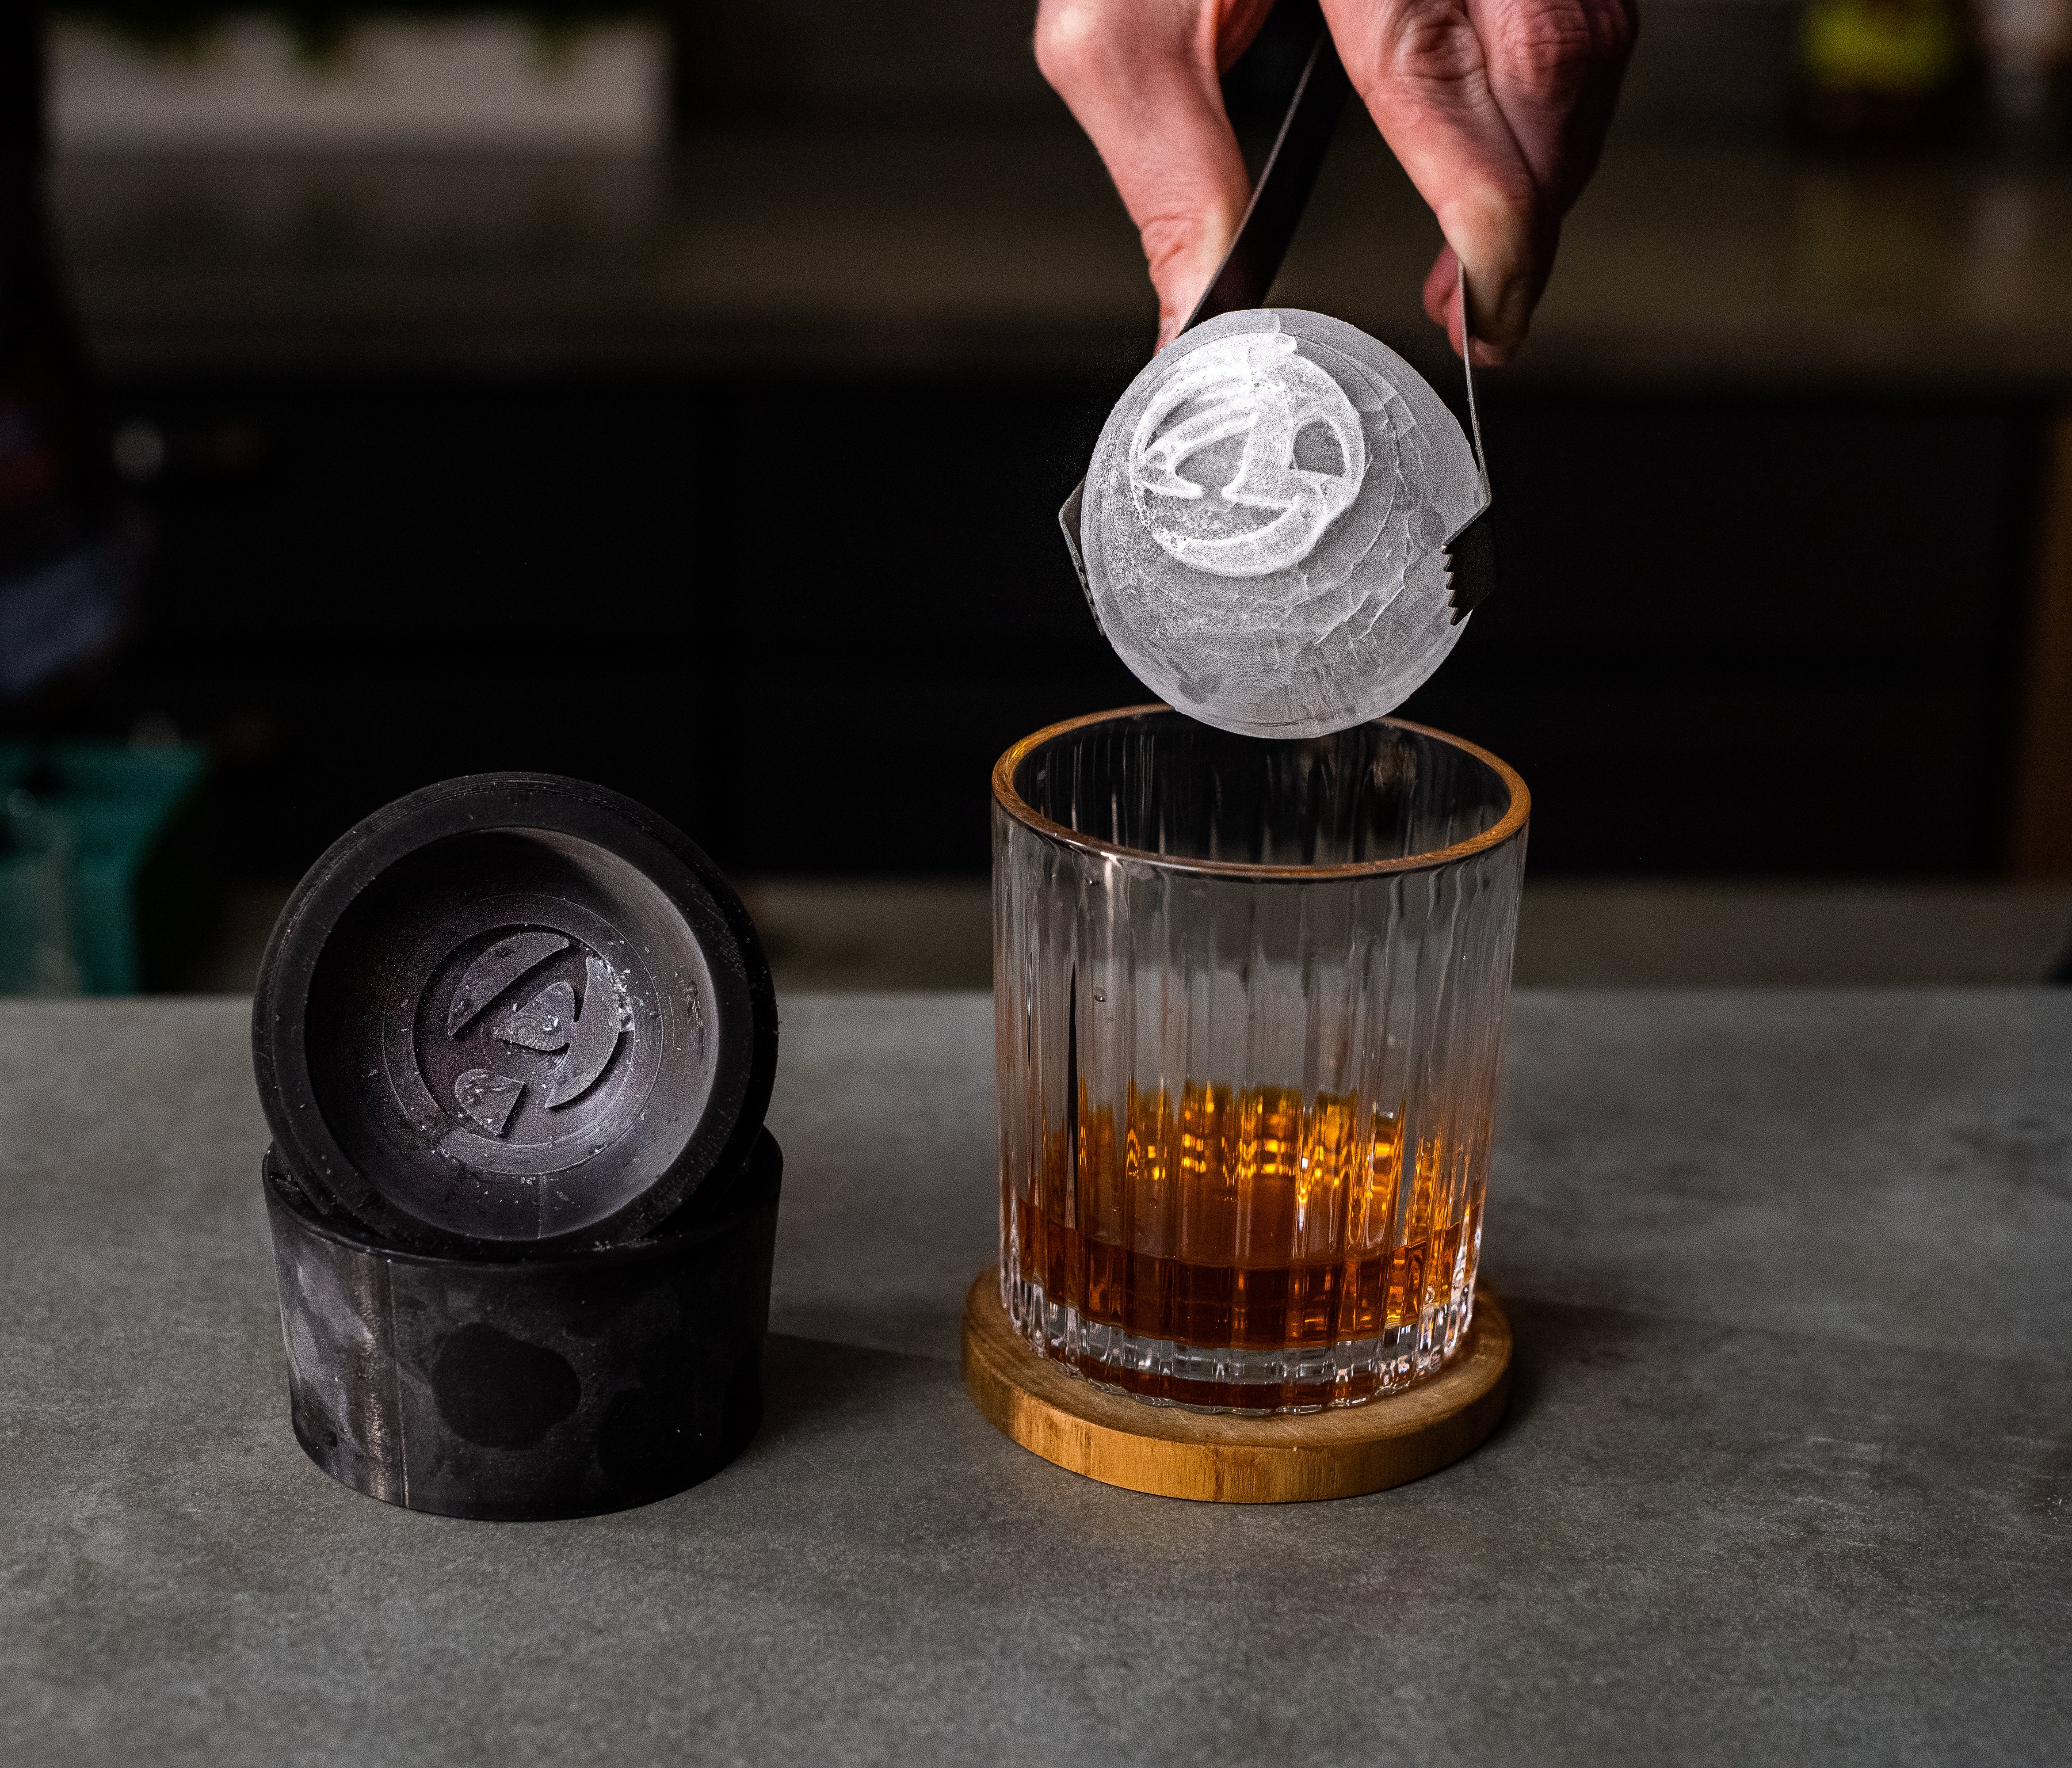 Siligrams Customized Silicone Ice Cube Mold, Custom Ice Cube Mold -  Personalized 1.75-Inch, 2-Inch Ice Mold for Cocktails, Whiskey Ice Cube  Mold with